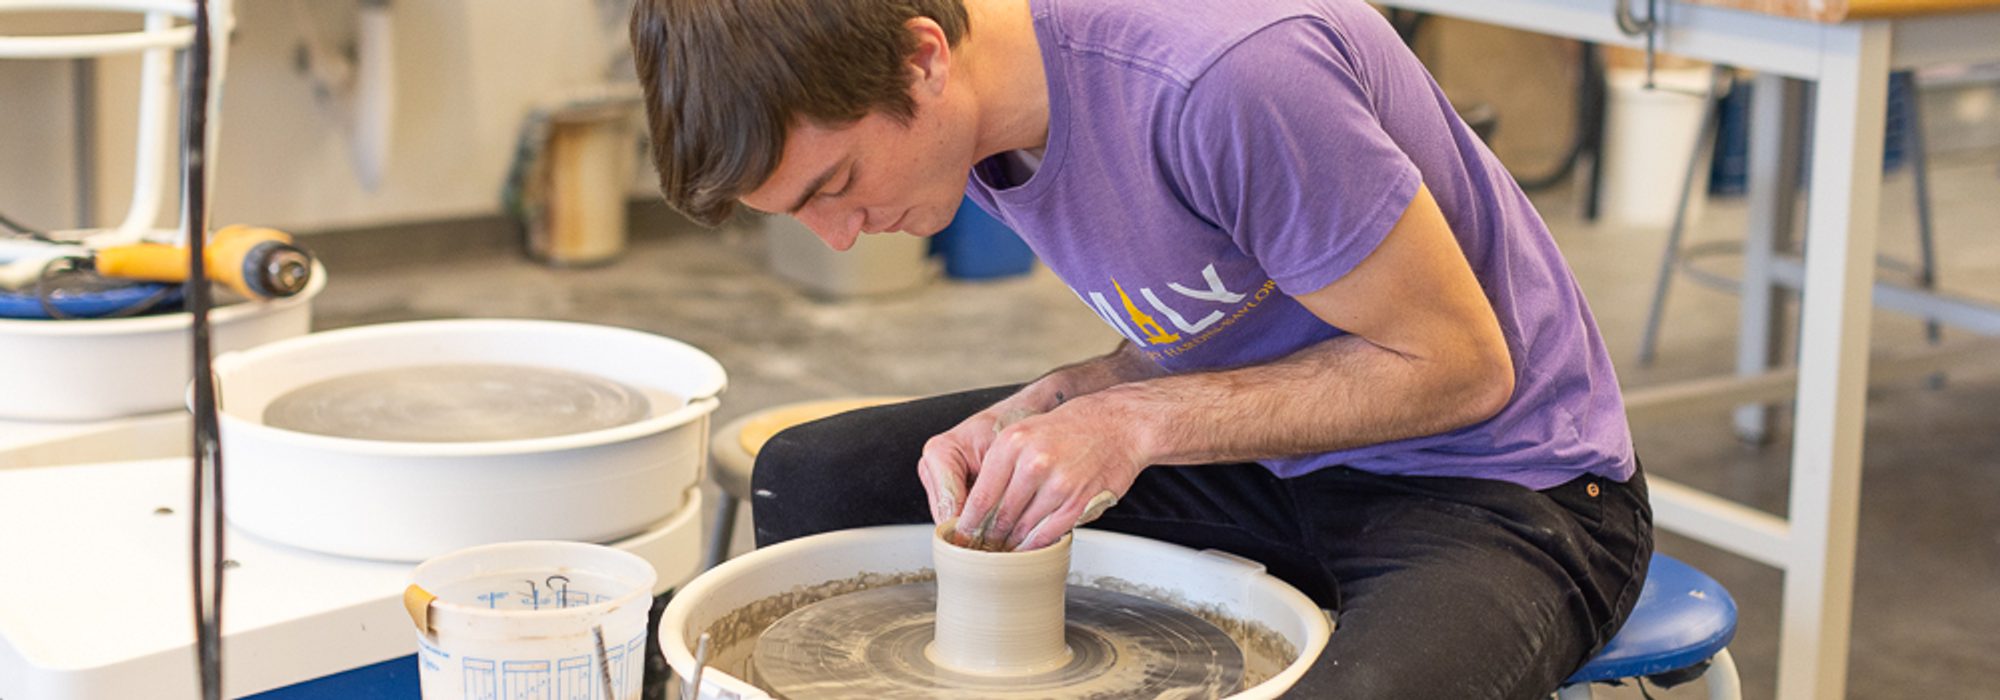 Bachelors of Art student sculpting pottery in art studio at UMHB.